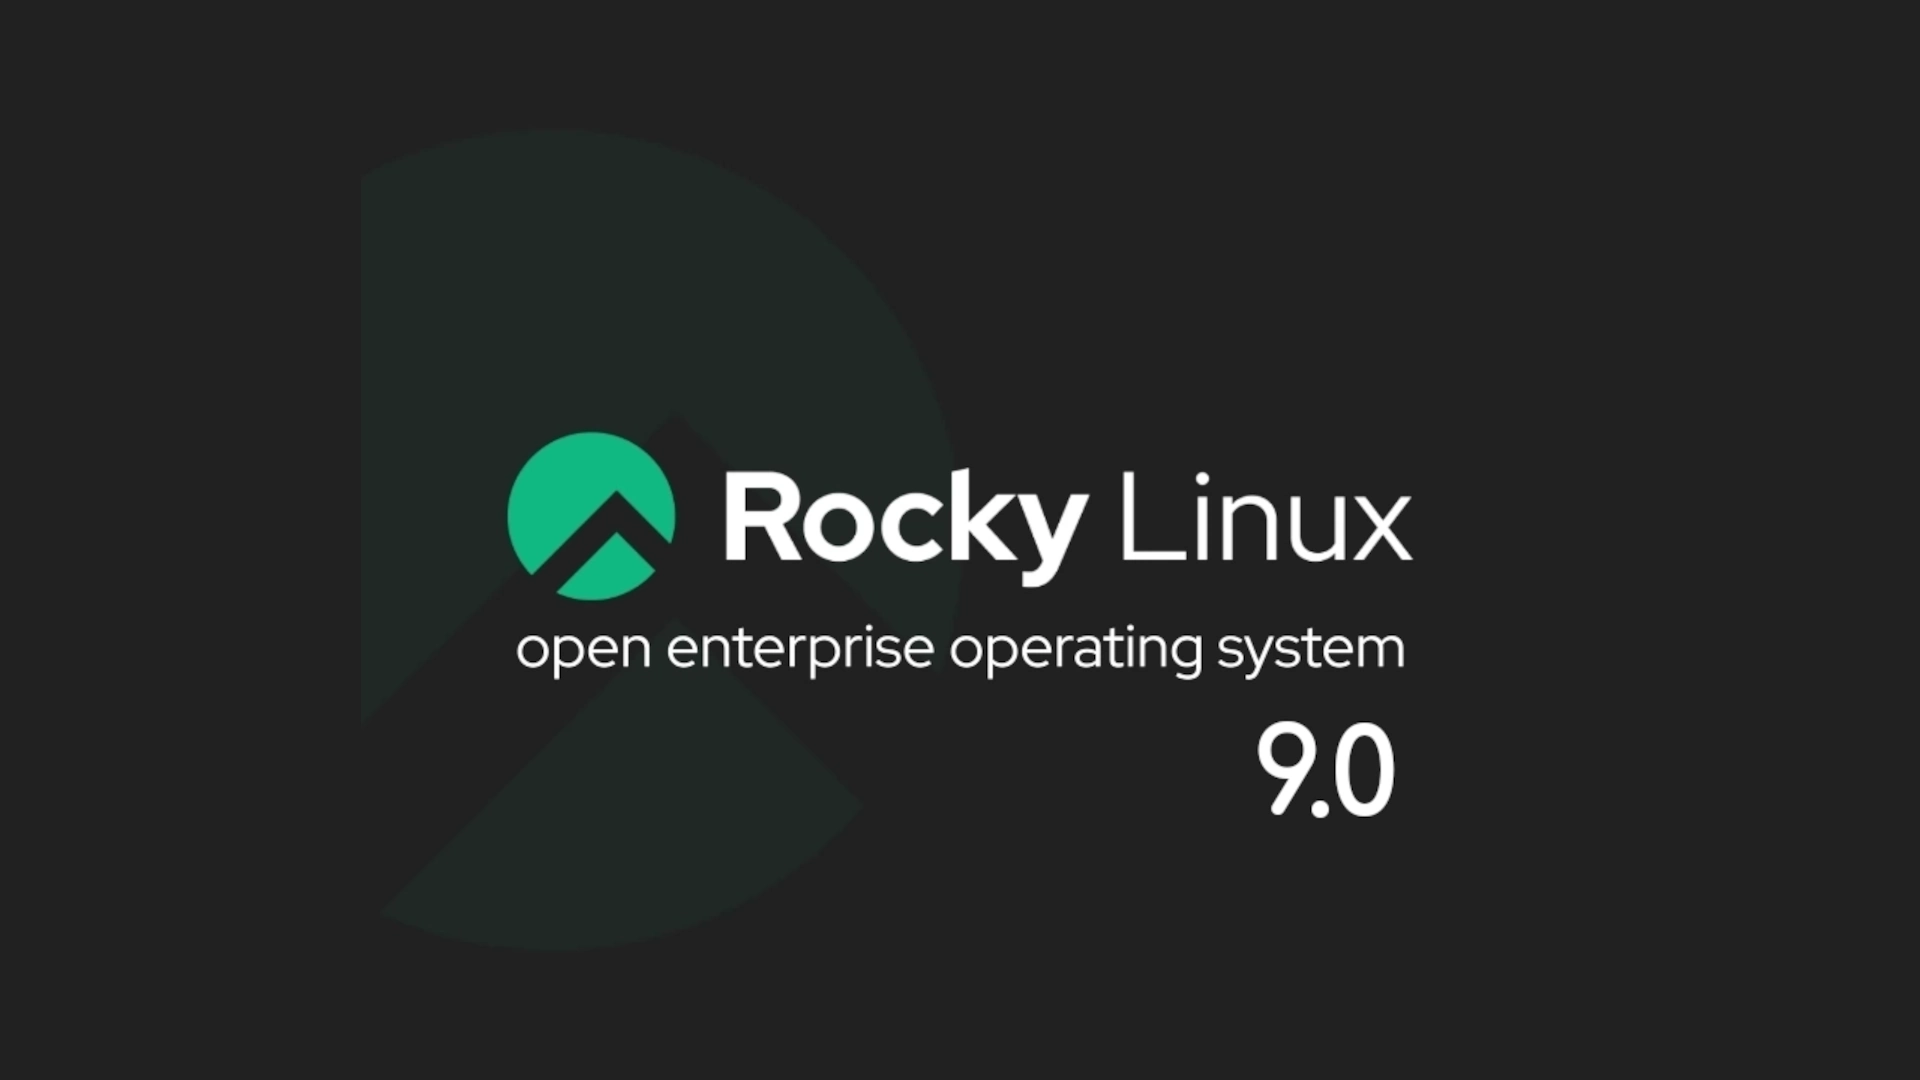 Rocky Linux 9 Officially Released with GNOME 40 Desktop, Improved Security